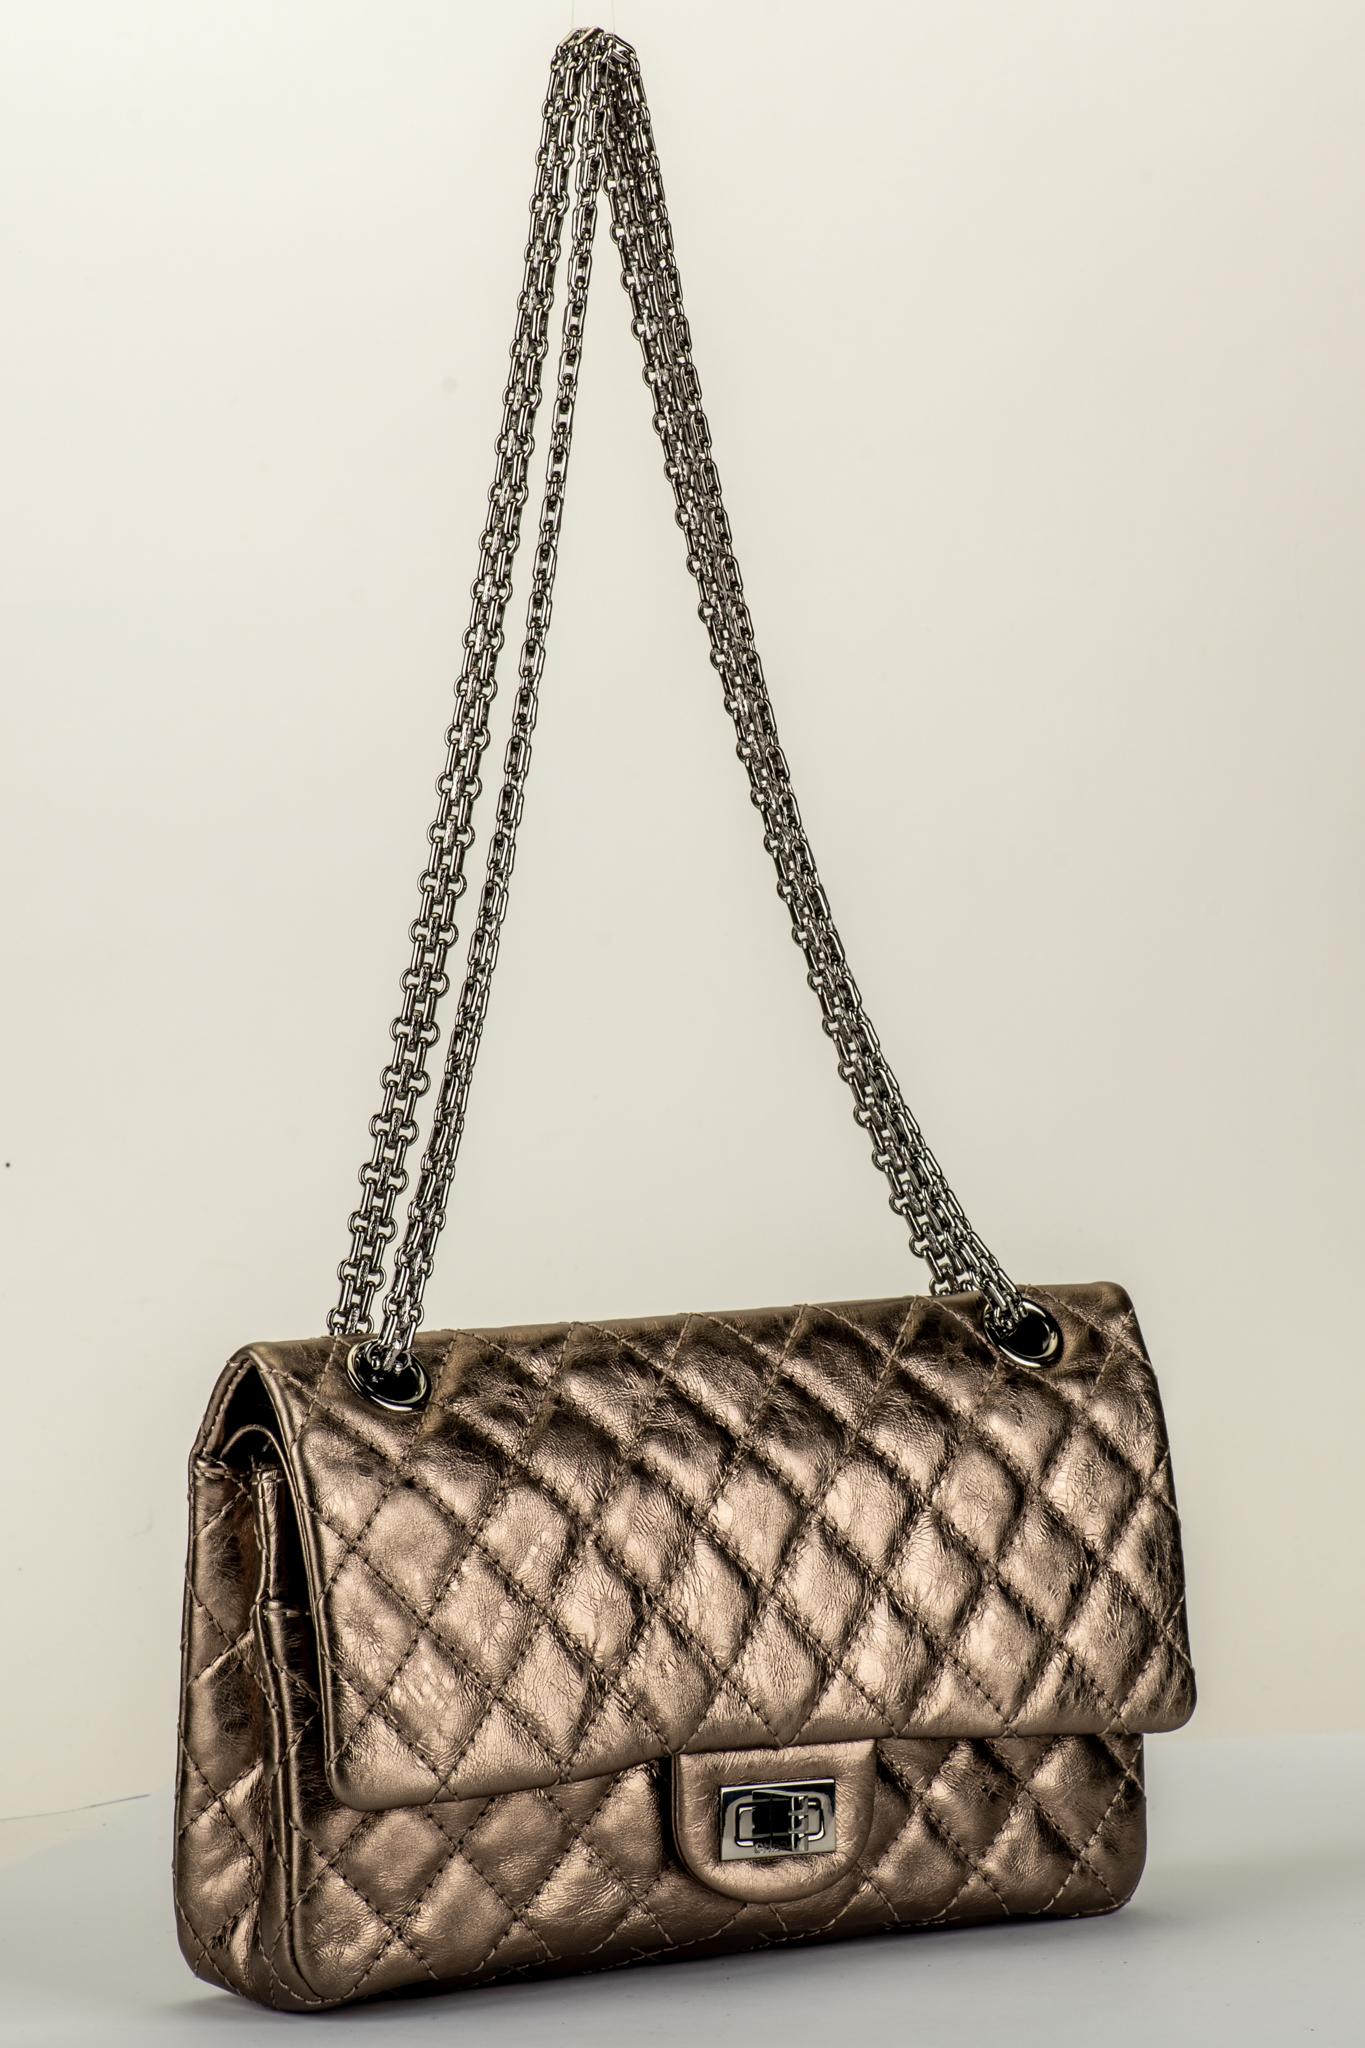 Chanel Argent Fonce' Reissue Double Flap Bag In Excellent Condition For Sale In West Hollywood, CA